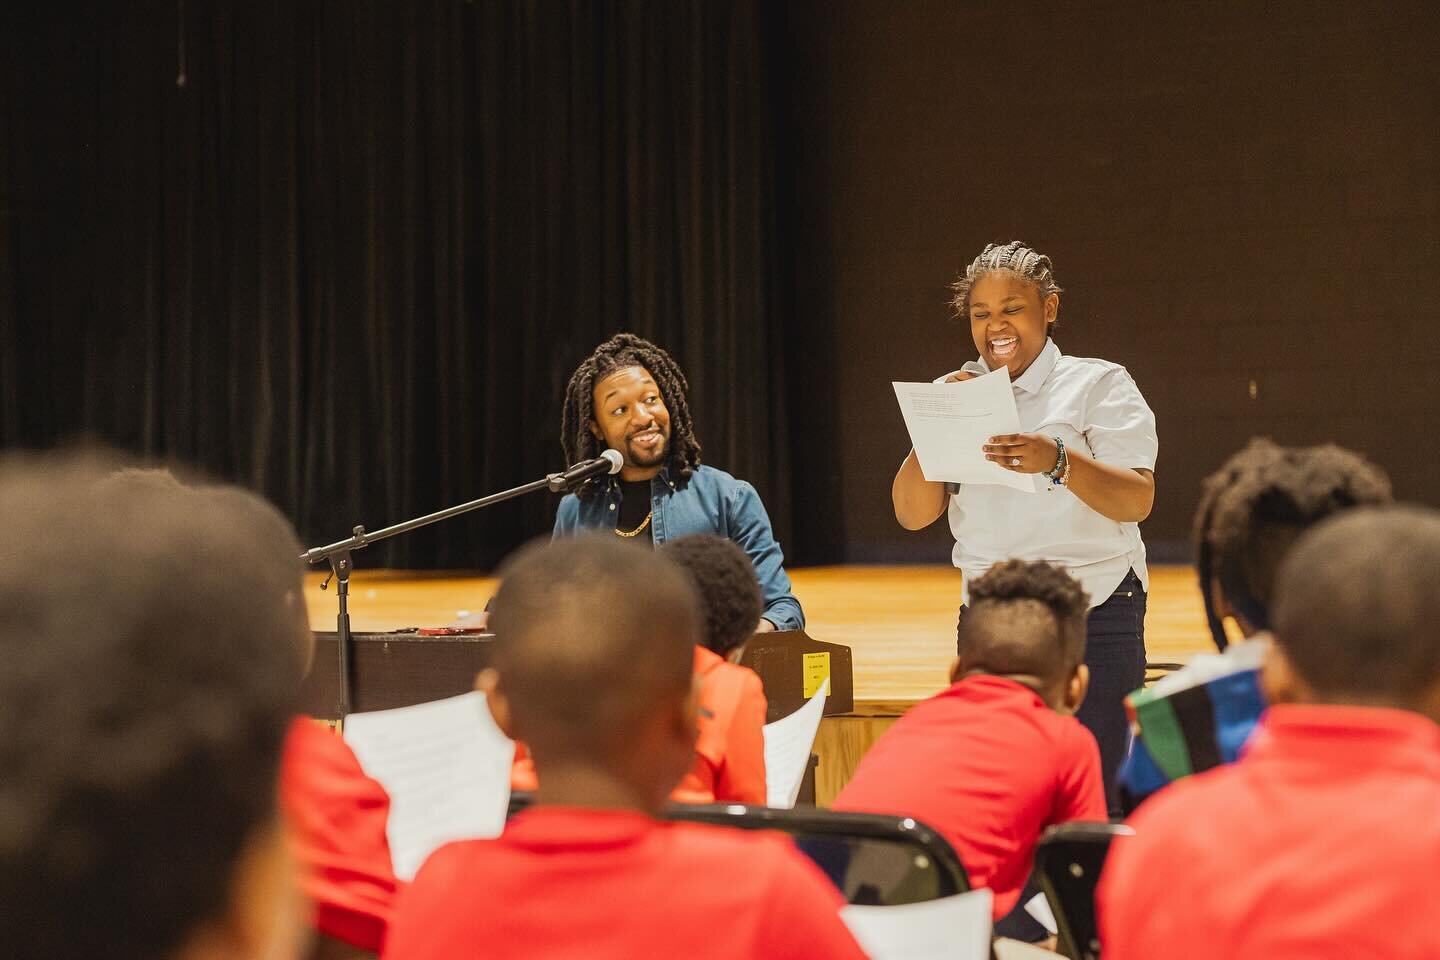 Our &lsquo;Lighting The Way&rsquo; @apsbamoacademy scholars received a music instruction led by singer, @keeyenmartin! After vocal warm ups, these creatives learned two songs: &ldquo;Smile&rdquo; by Kirk Franklin and &ldquo;Don&rsquo;t You Worry Abou